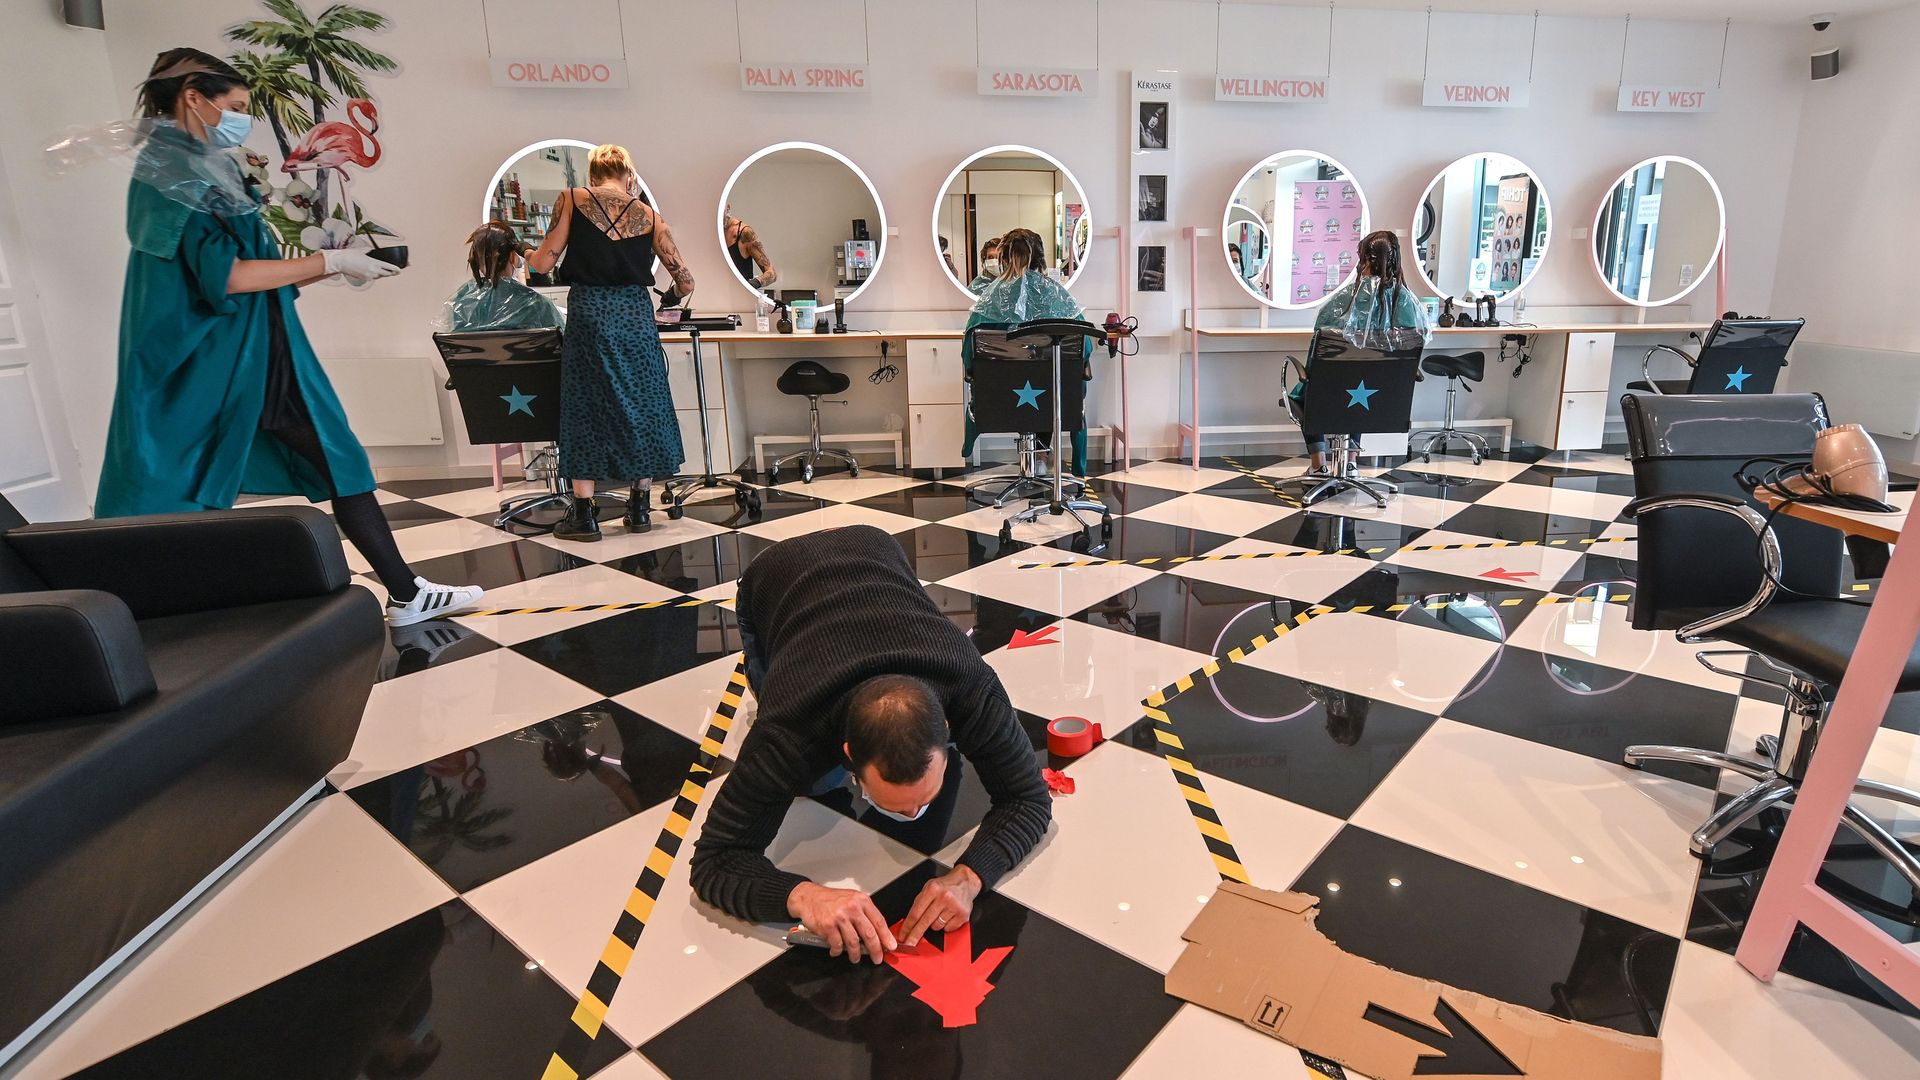 Members of staff visit the Tchip hair dressing salon which is carrying out a test run with the use of face masks and markers on the floor 